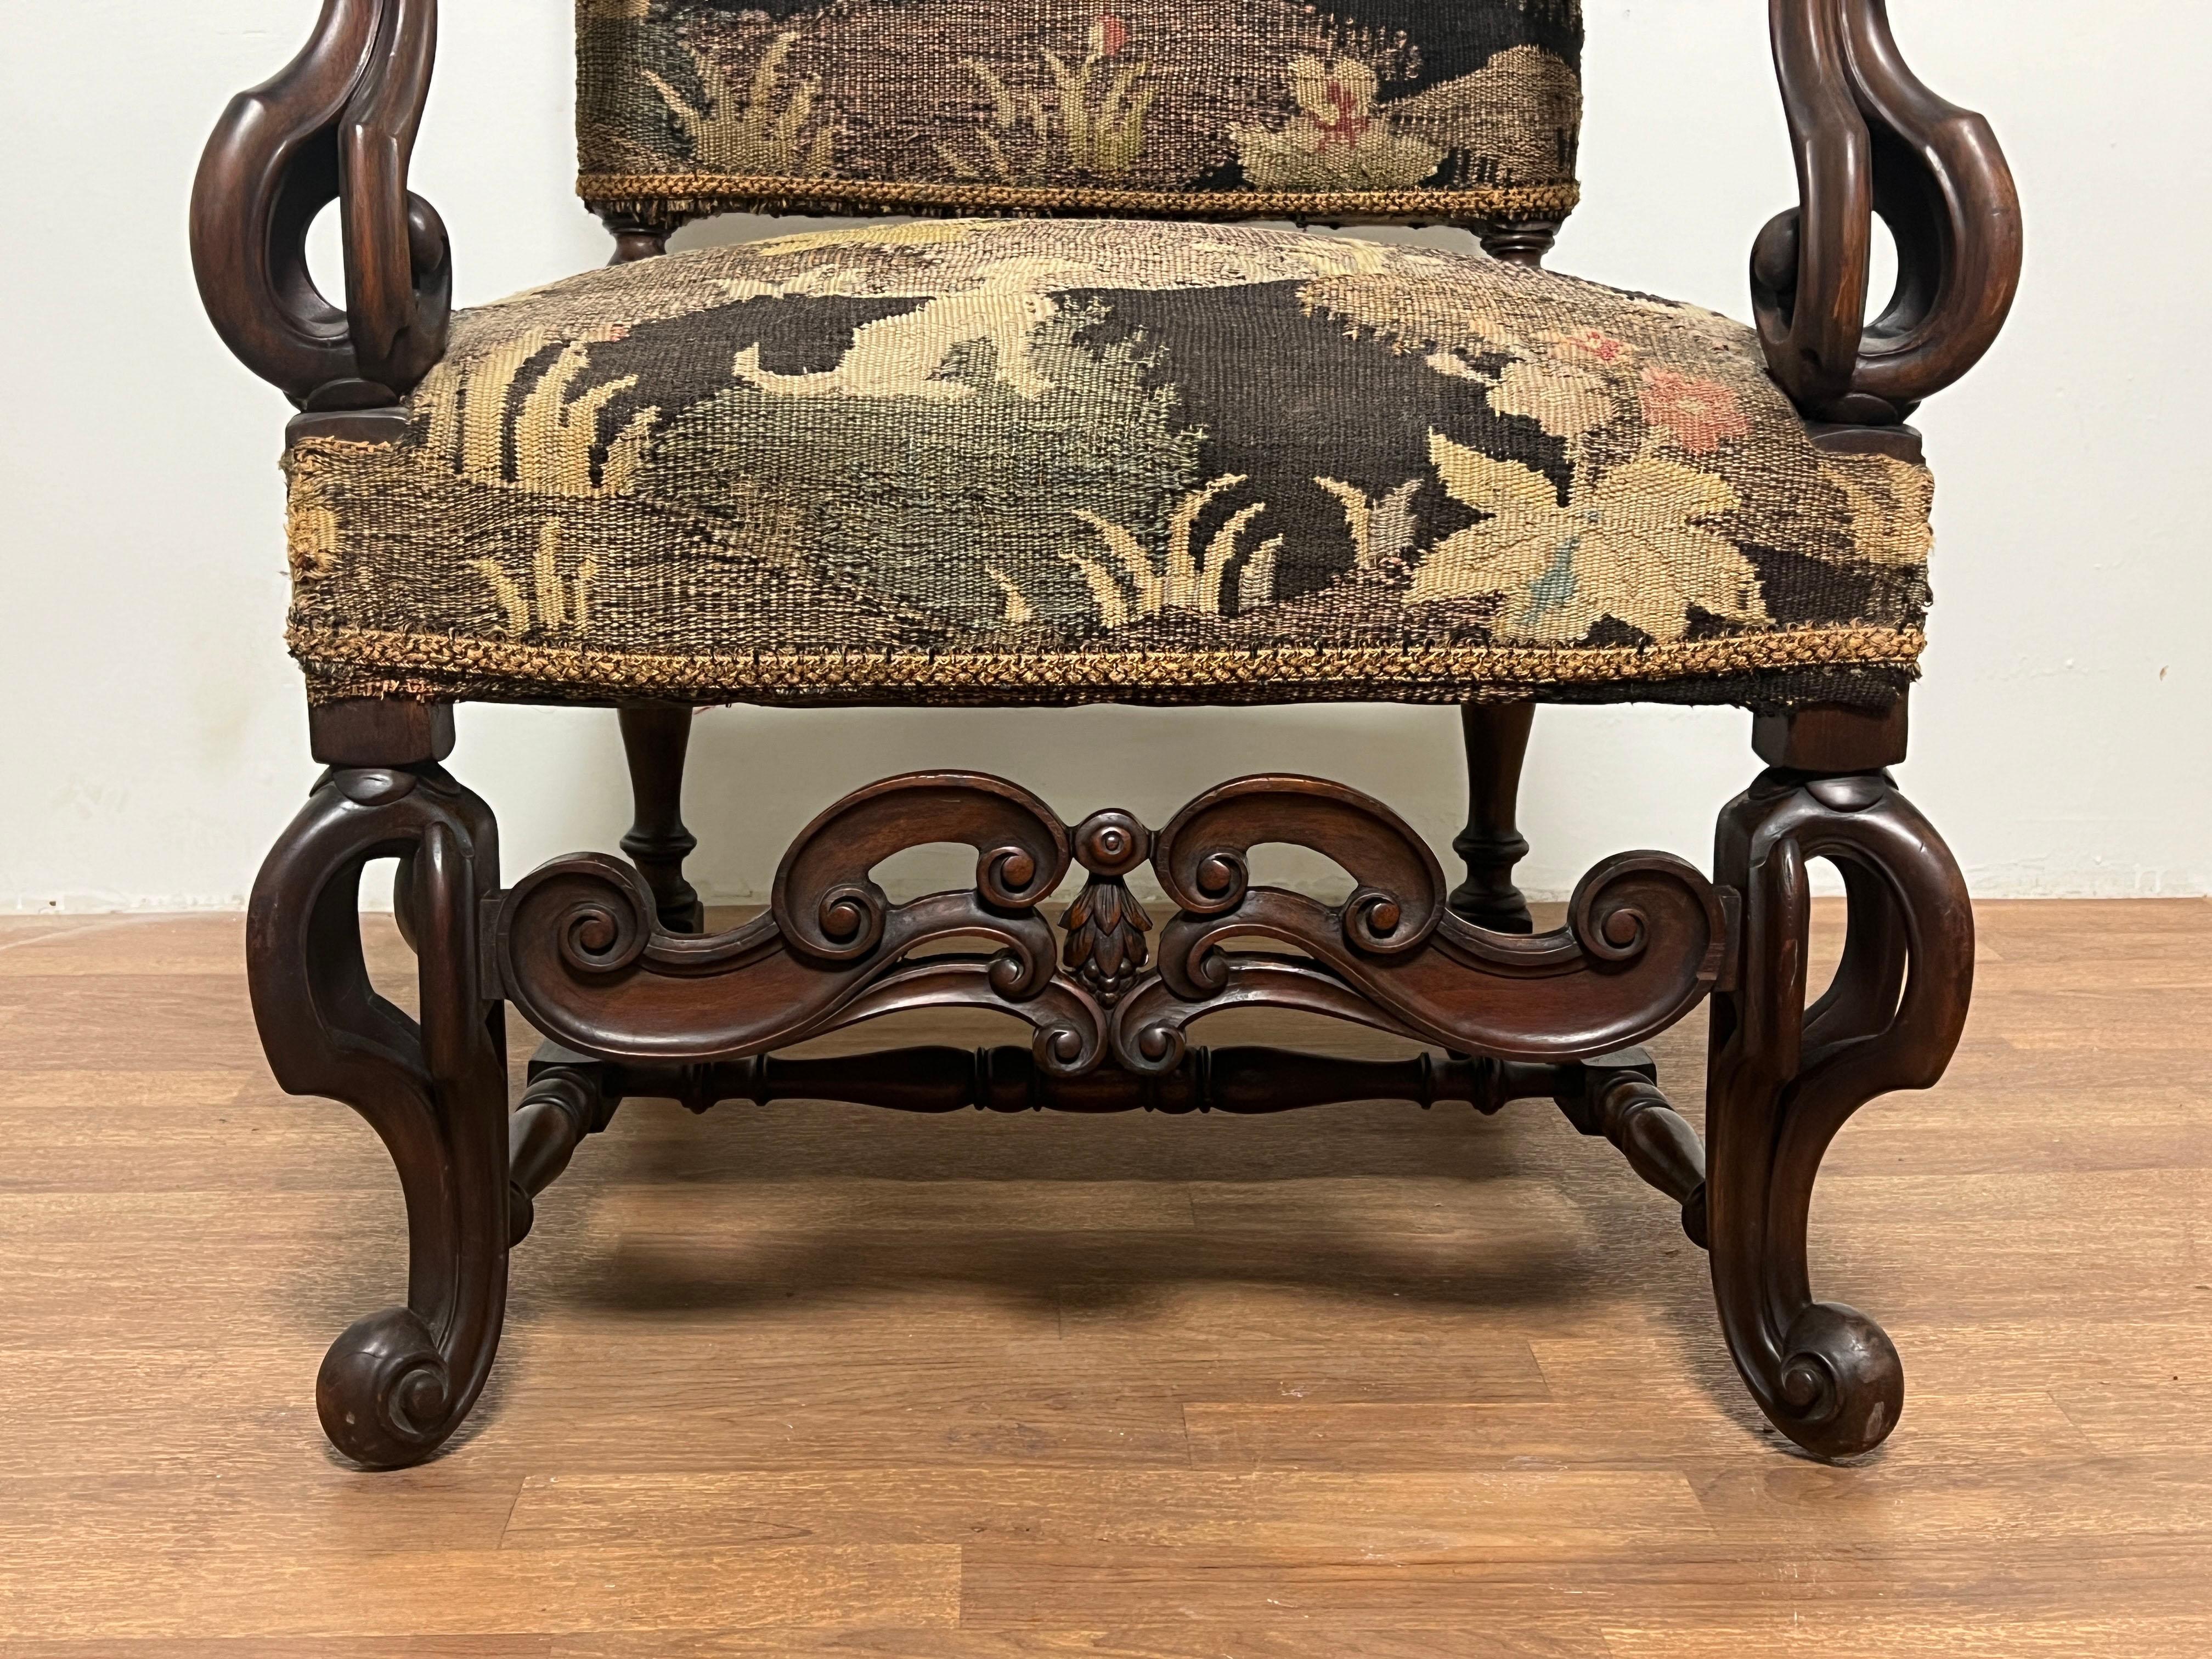 19th Century Renaissance Revival Arm Chair Upholstered in Belgian Tapestry  For Sale 4